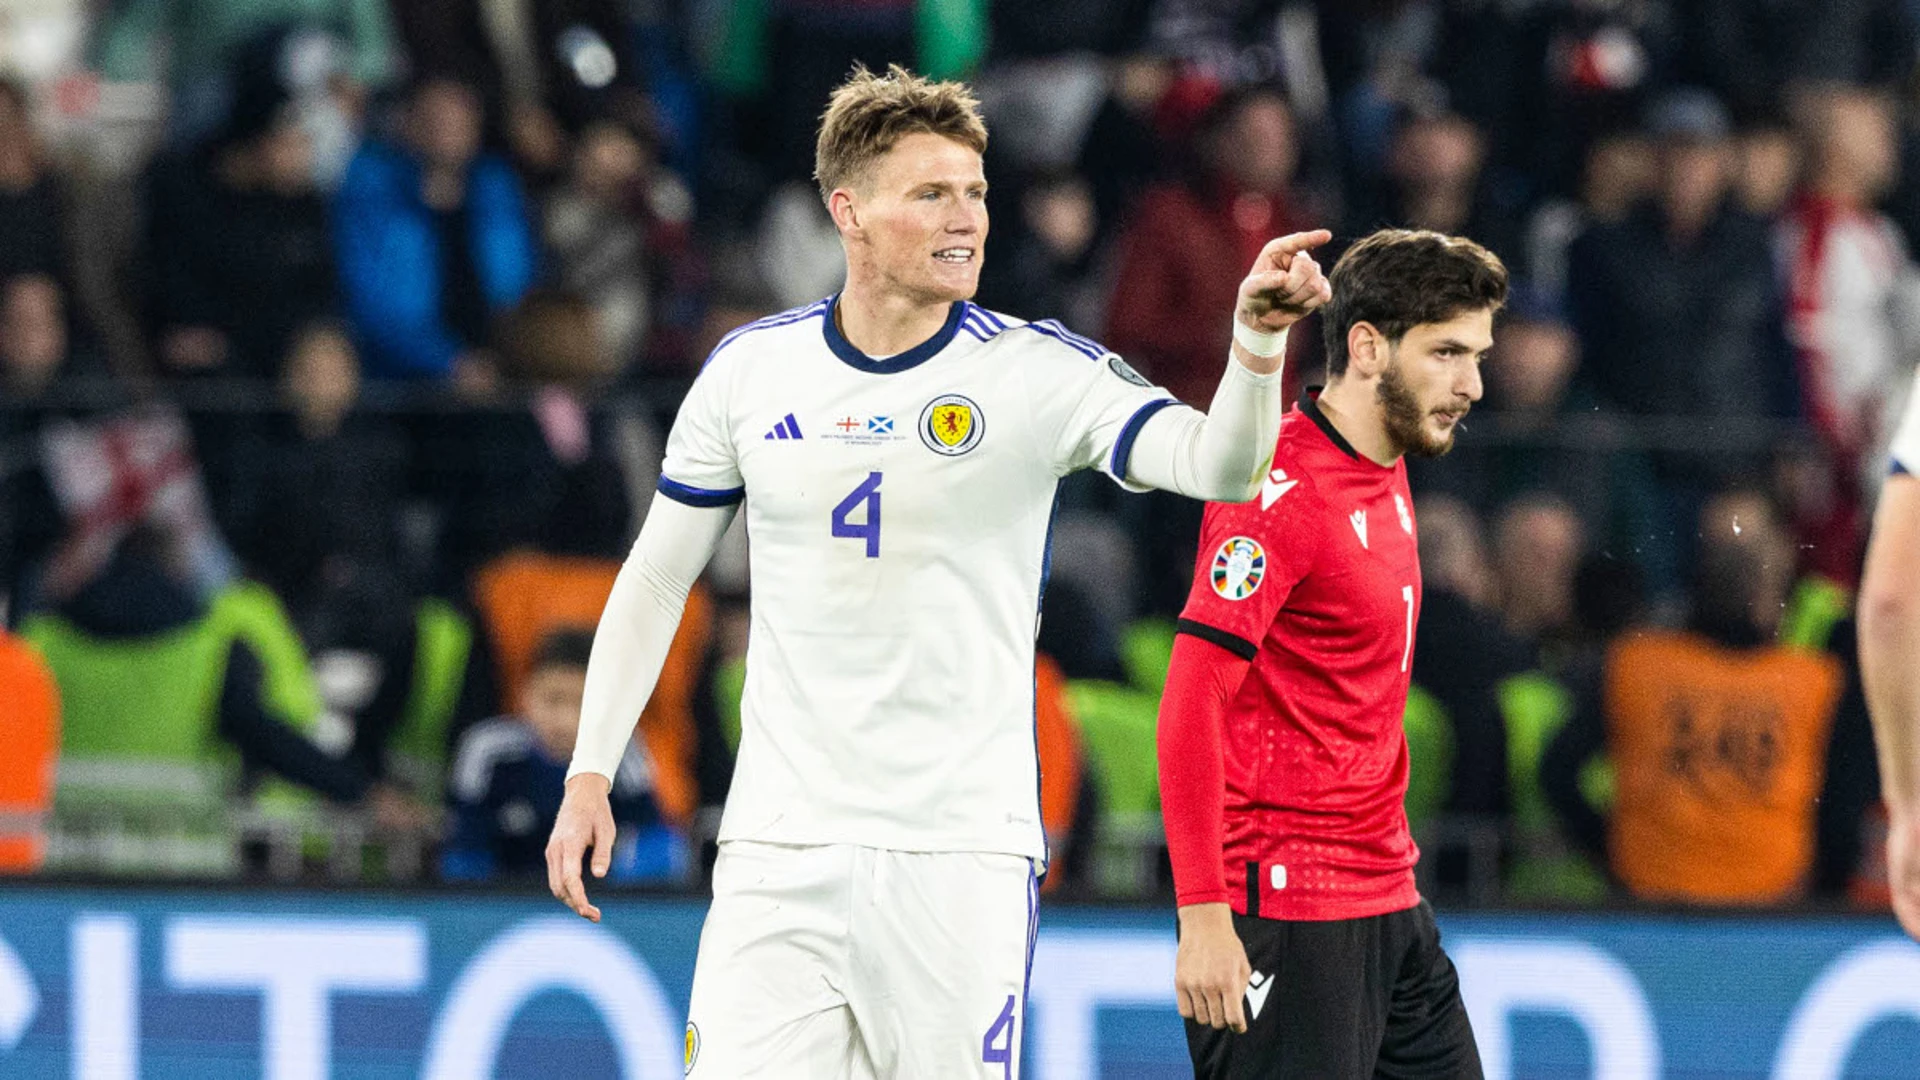 McTominay says 'not all doom and gloom' as Scotland seek to end winless streak